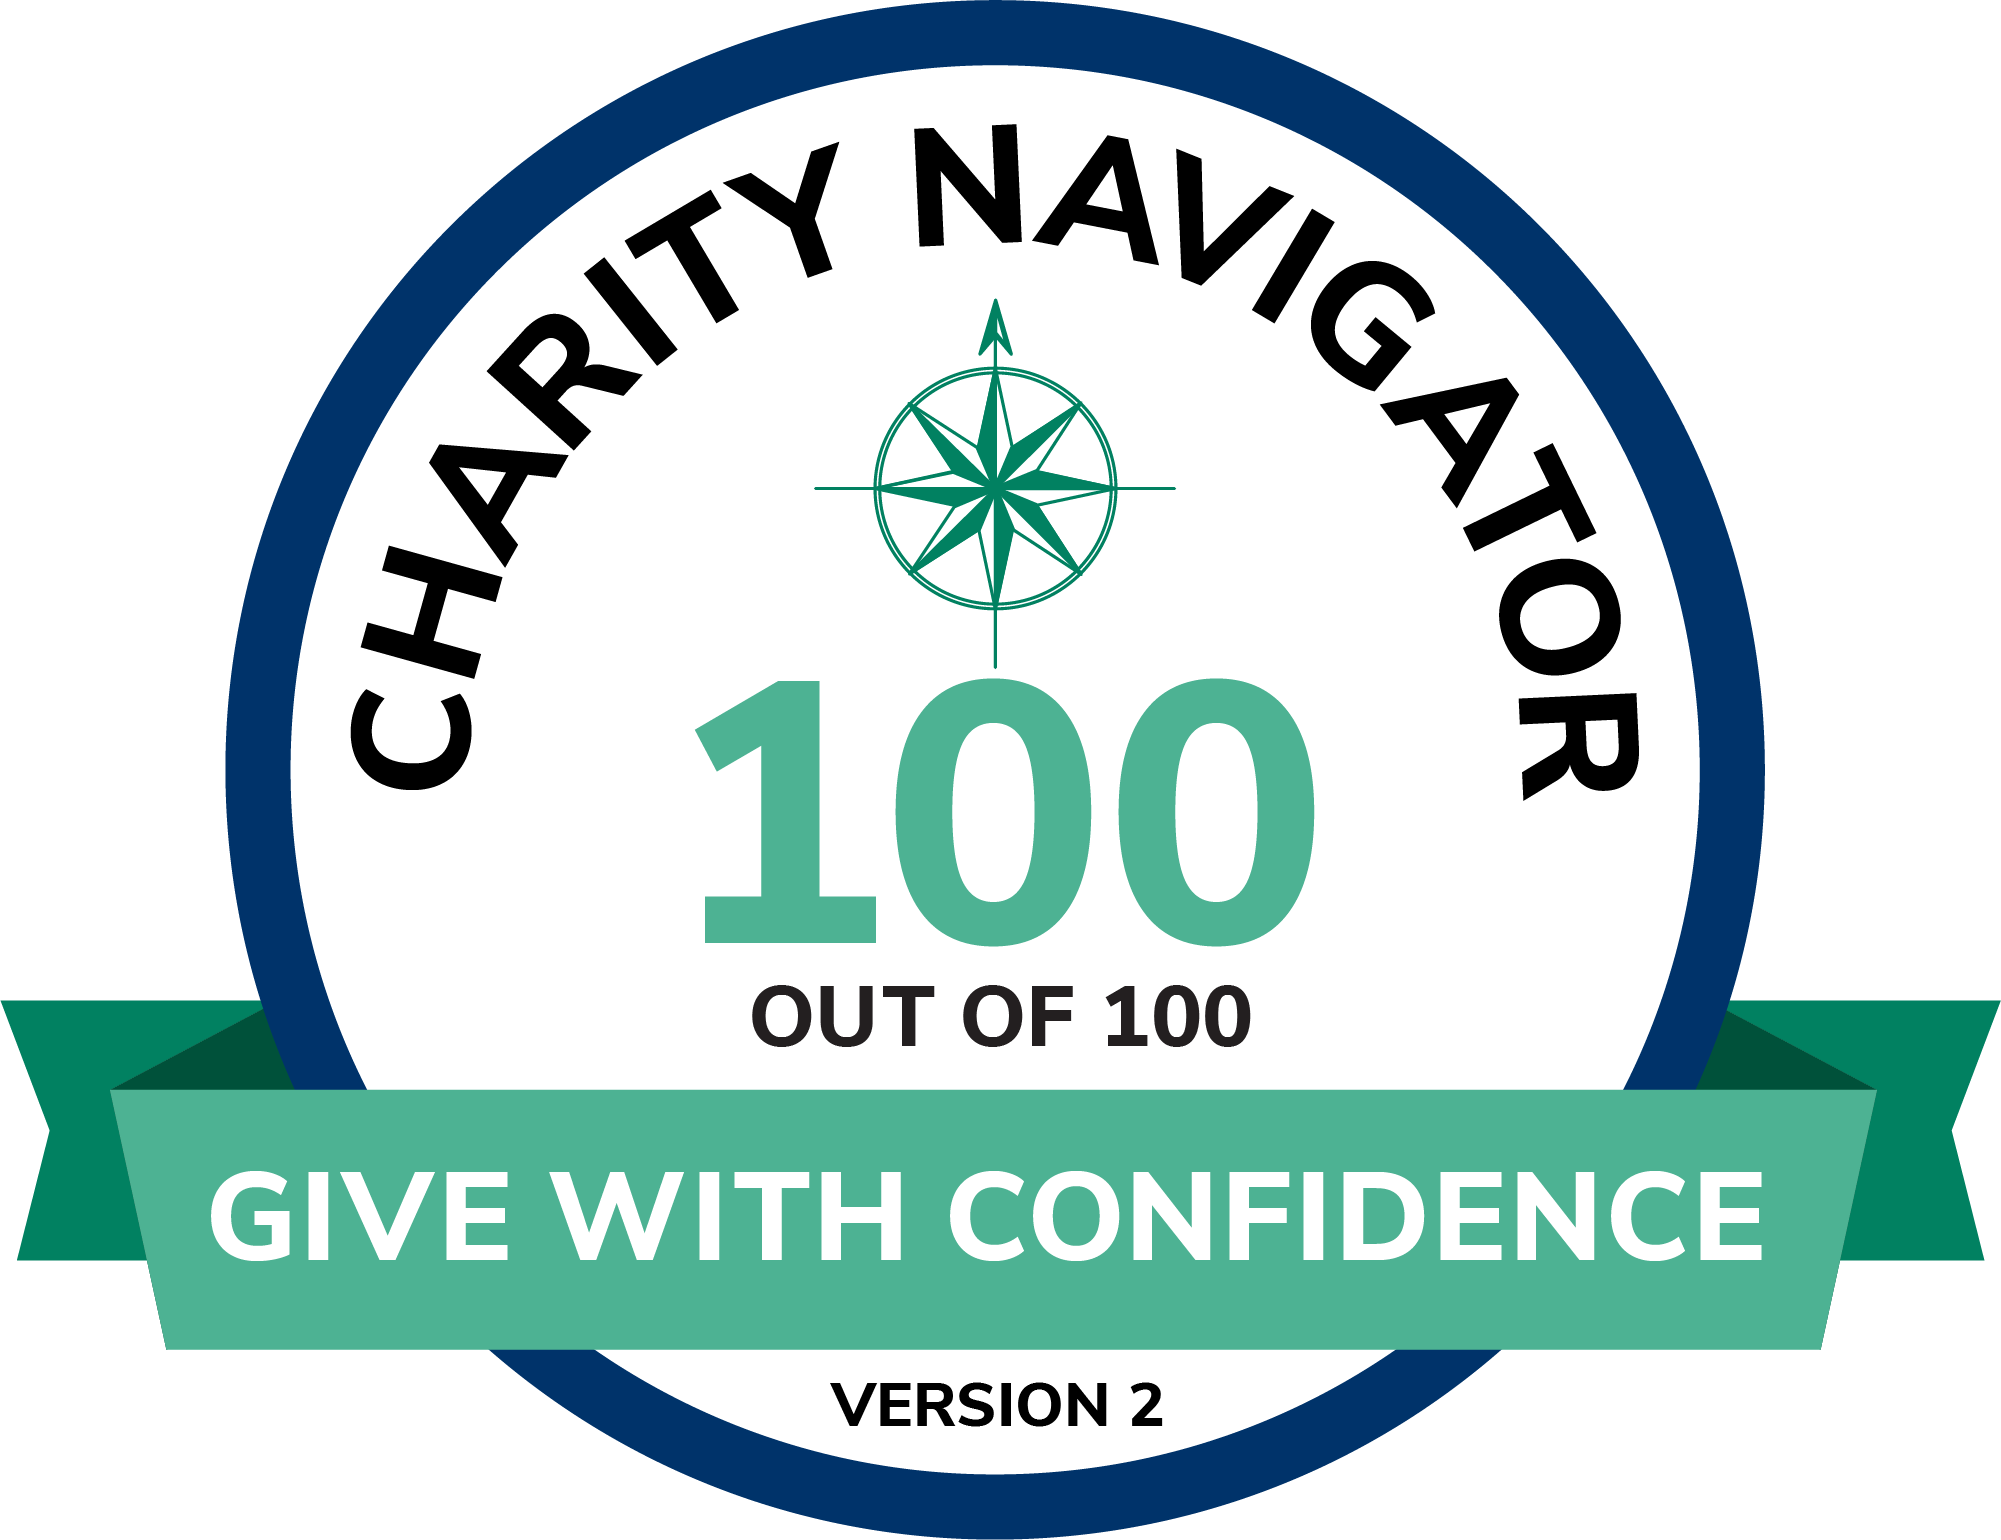 Charity Navigator 100: Give with Confidence